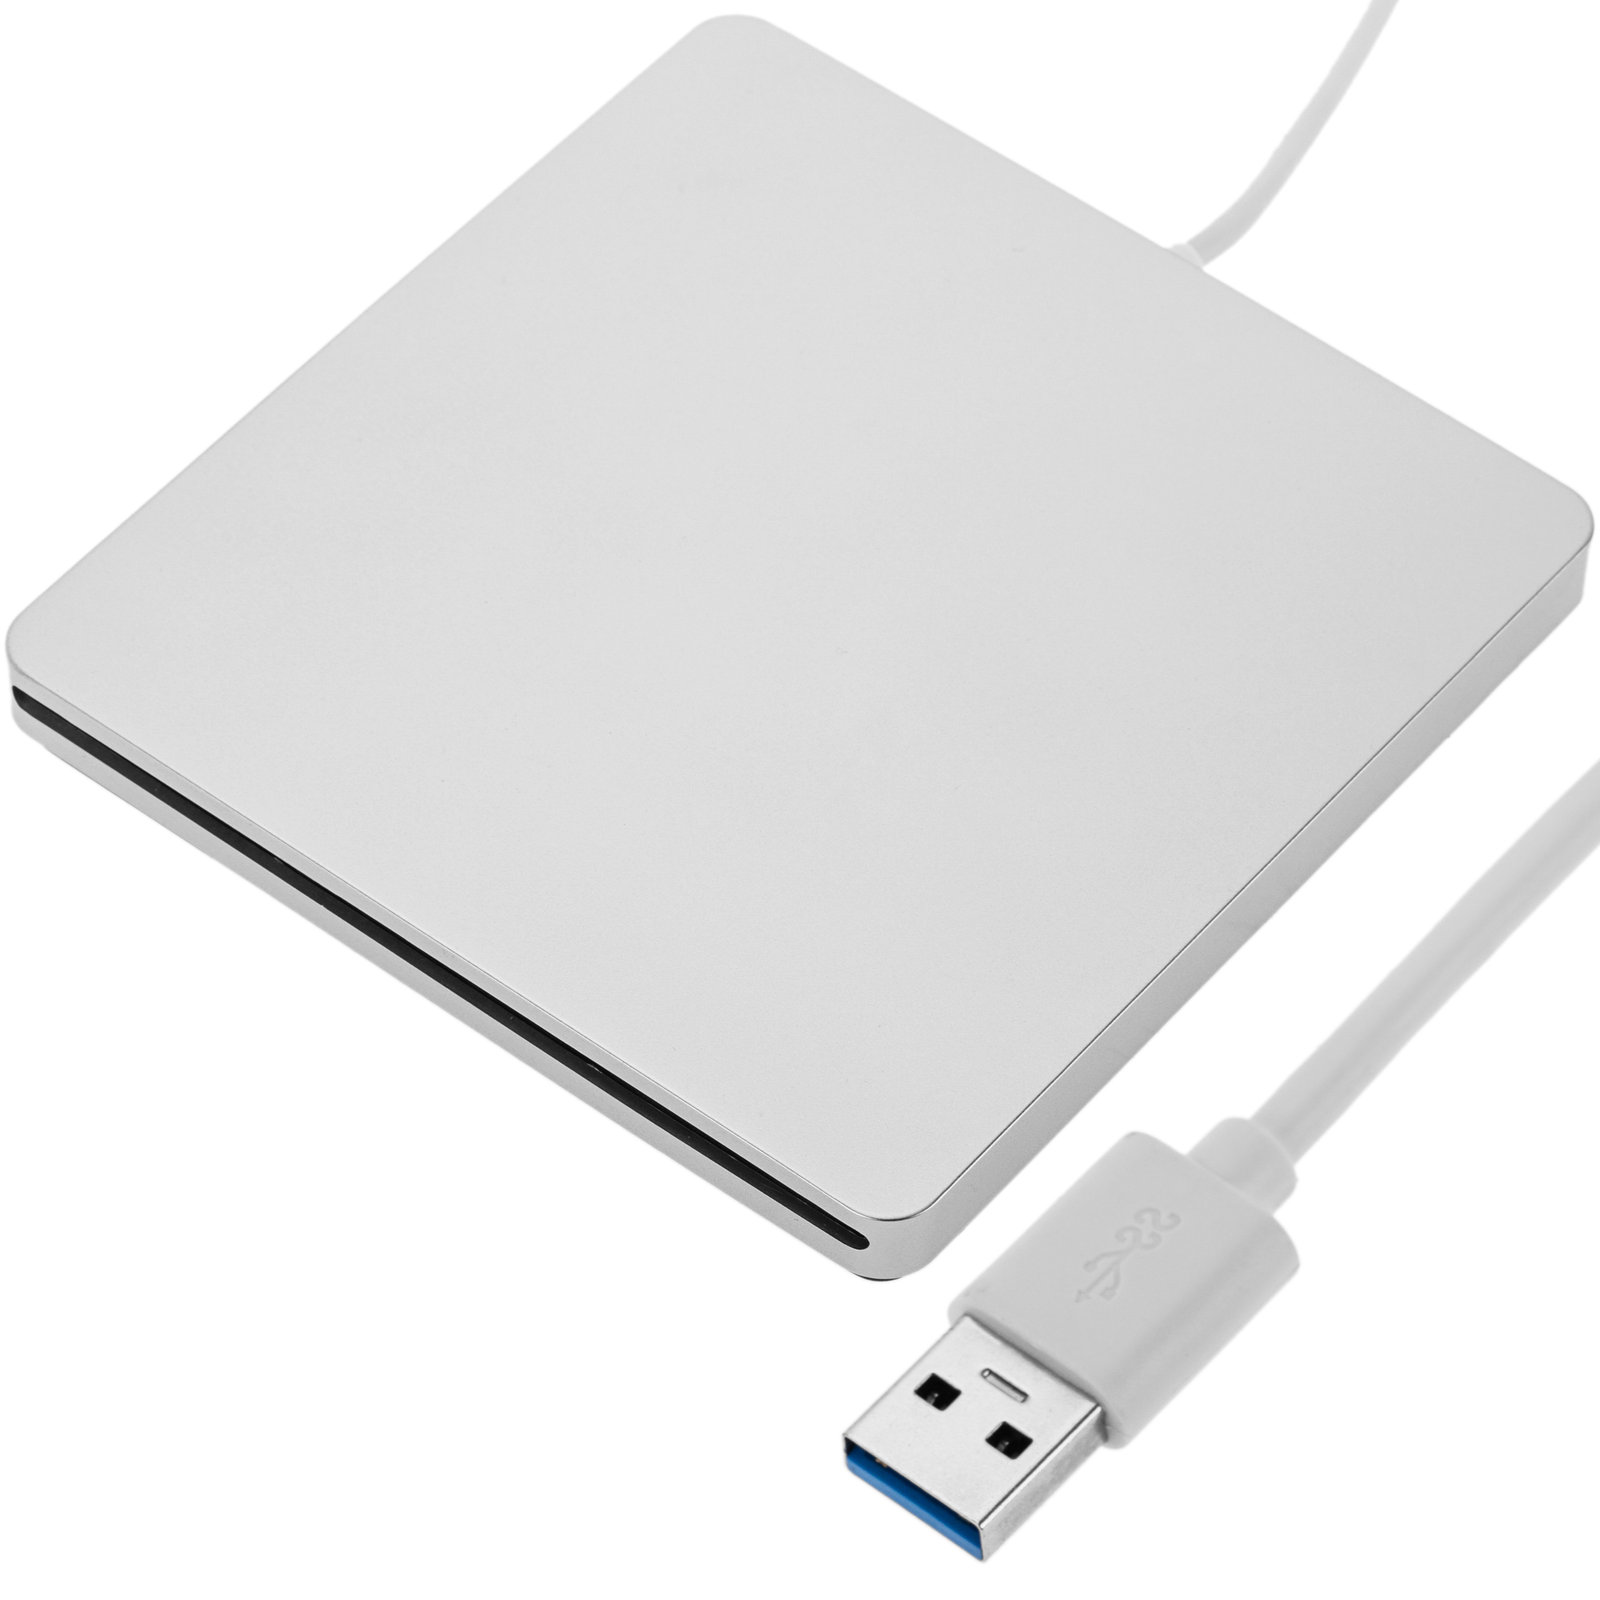 External 3.5 ”USB 2.0 Portable Floppy Drive 1.44MB FDD - Cablematic